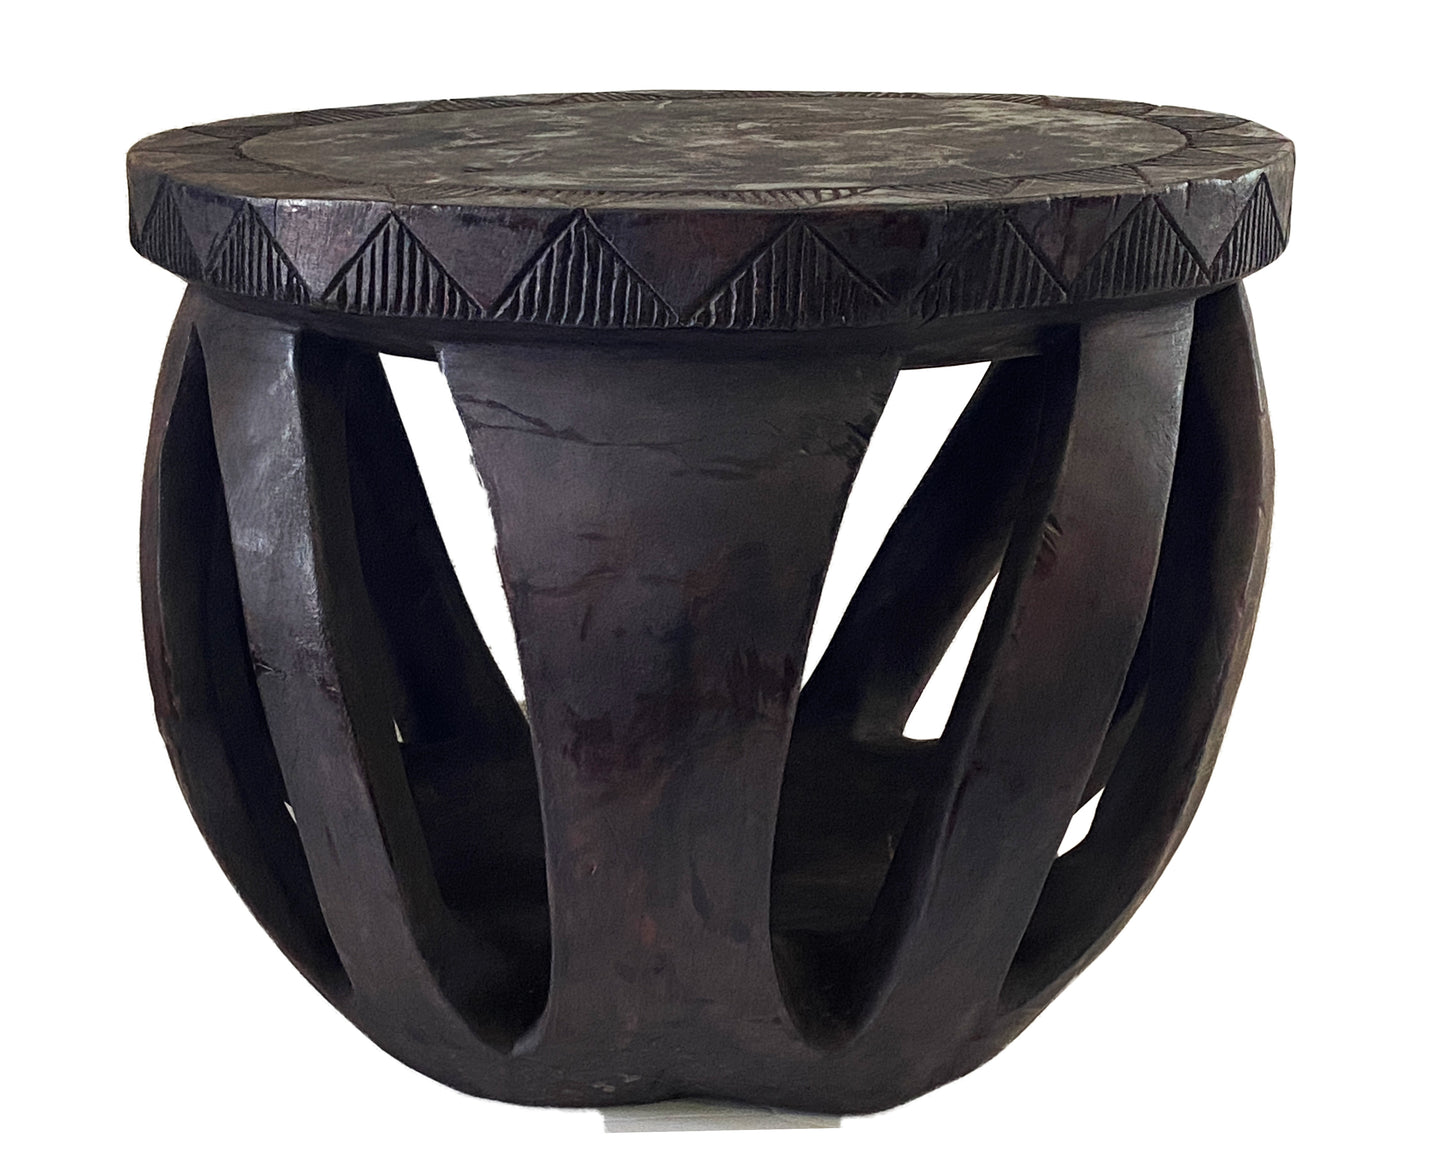 #3747 African  Baga LG Stool /Table Guinea-Bissau  14" H by 17.25"W